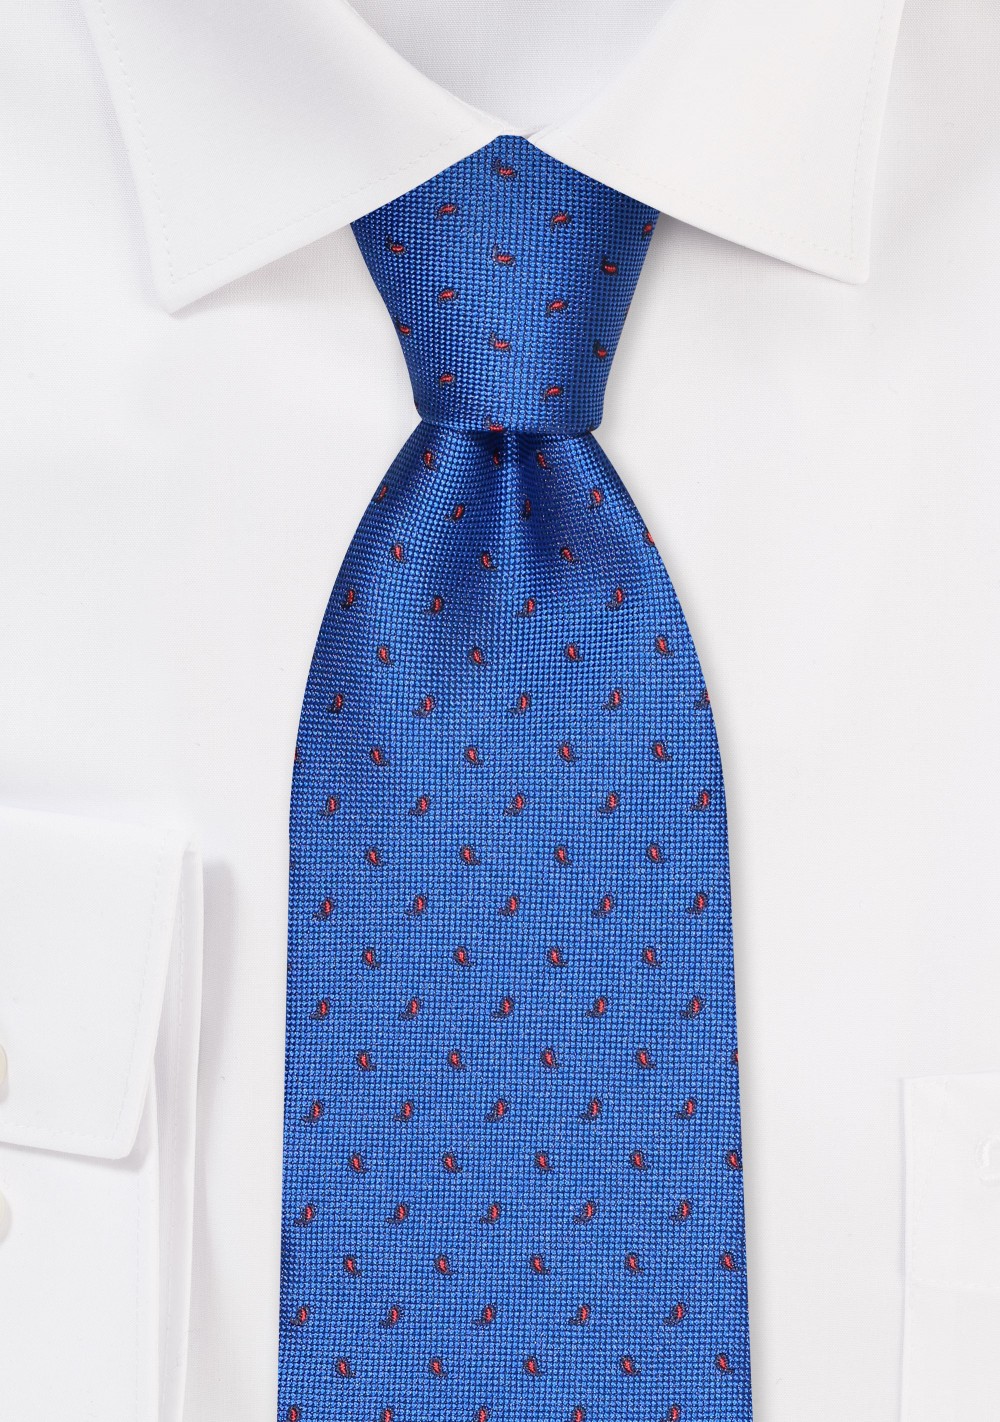 Royal Blue Tie with Woven Mini Paisleys in Red